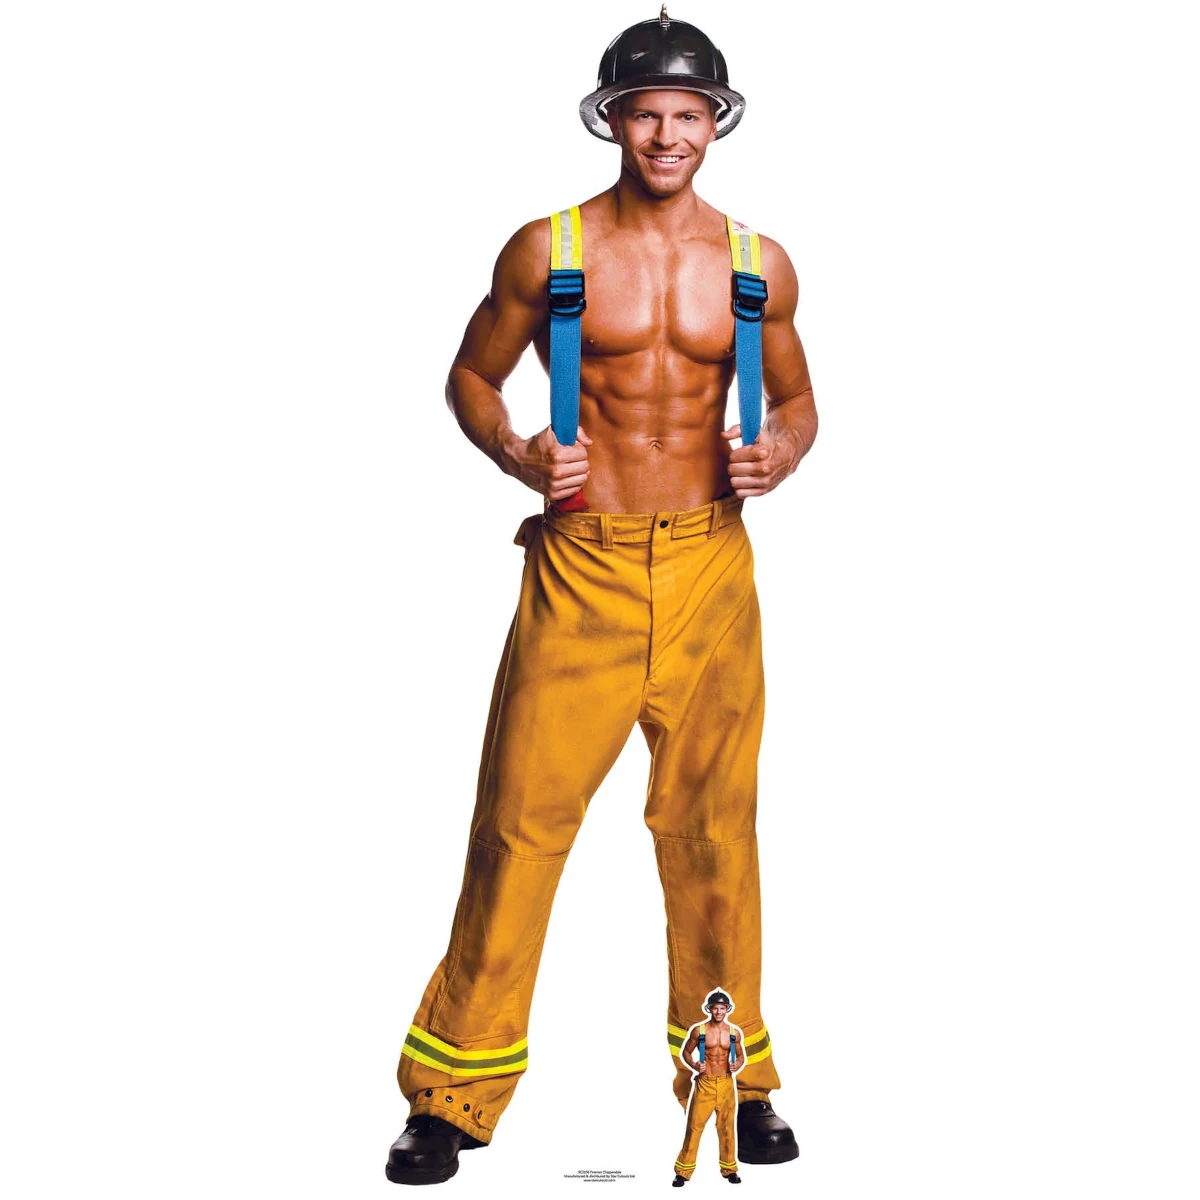 SC2156 Fireman (Chippendales) Official Lifesize + Mini Cardboard Cutout Standee Front